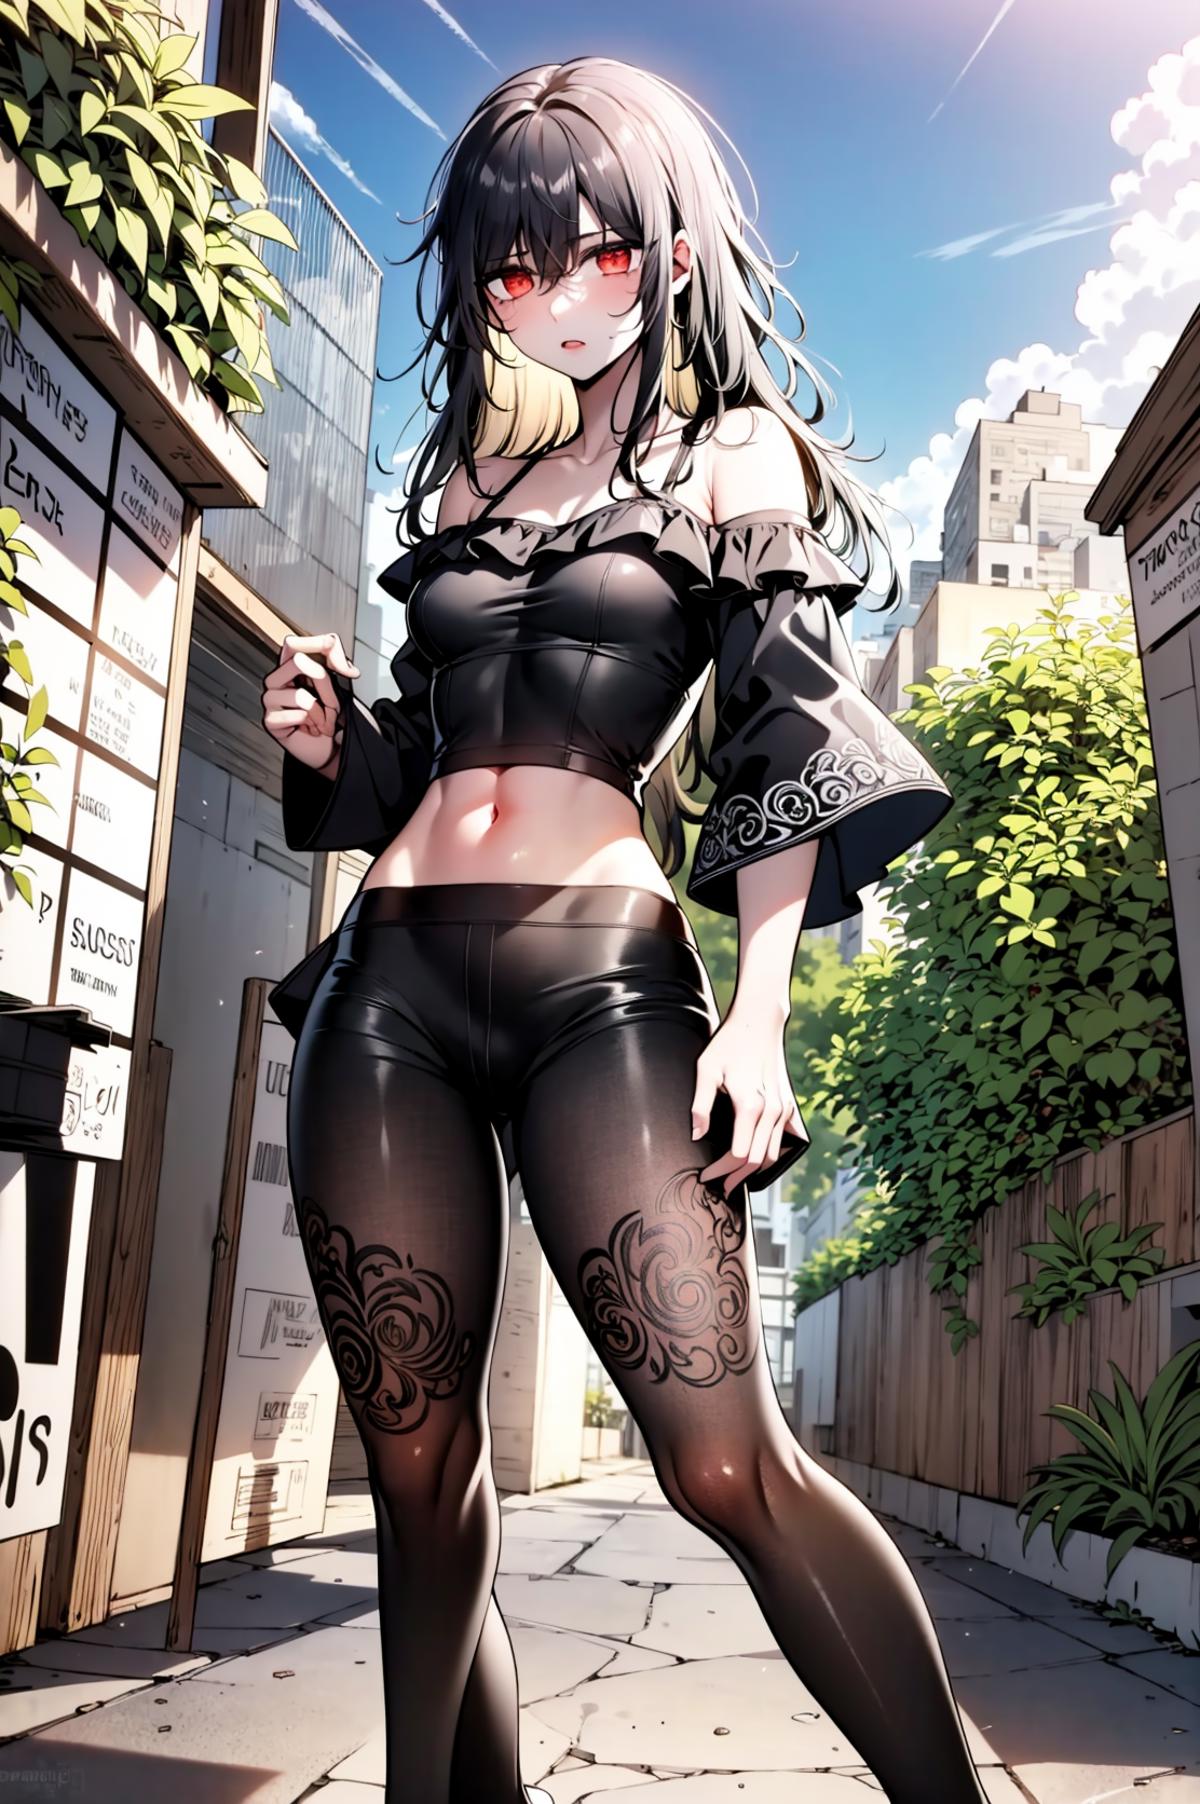 Jiang He | My wife is from the 1000th past | 我家老婆来自一千年前 | Manhua image by Shoxax